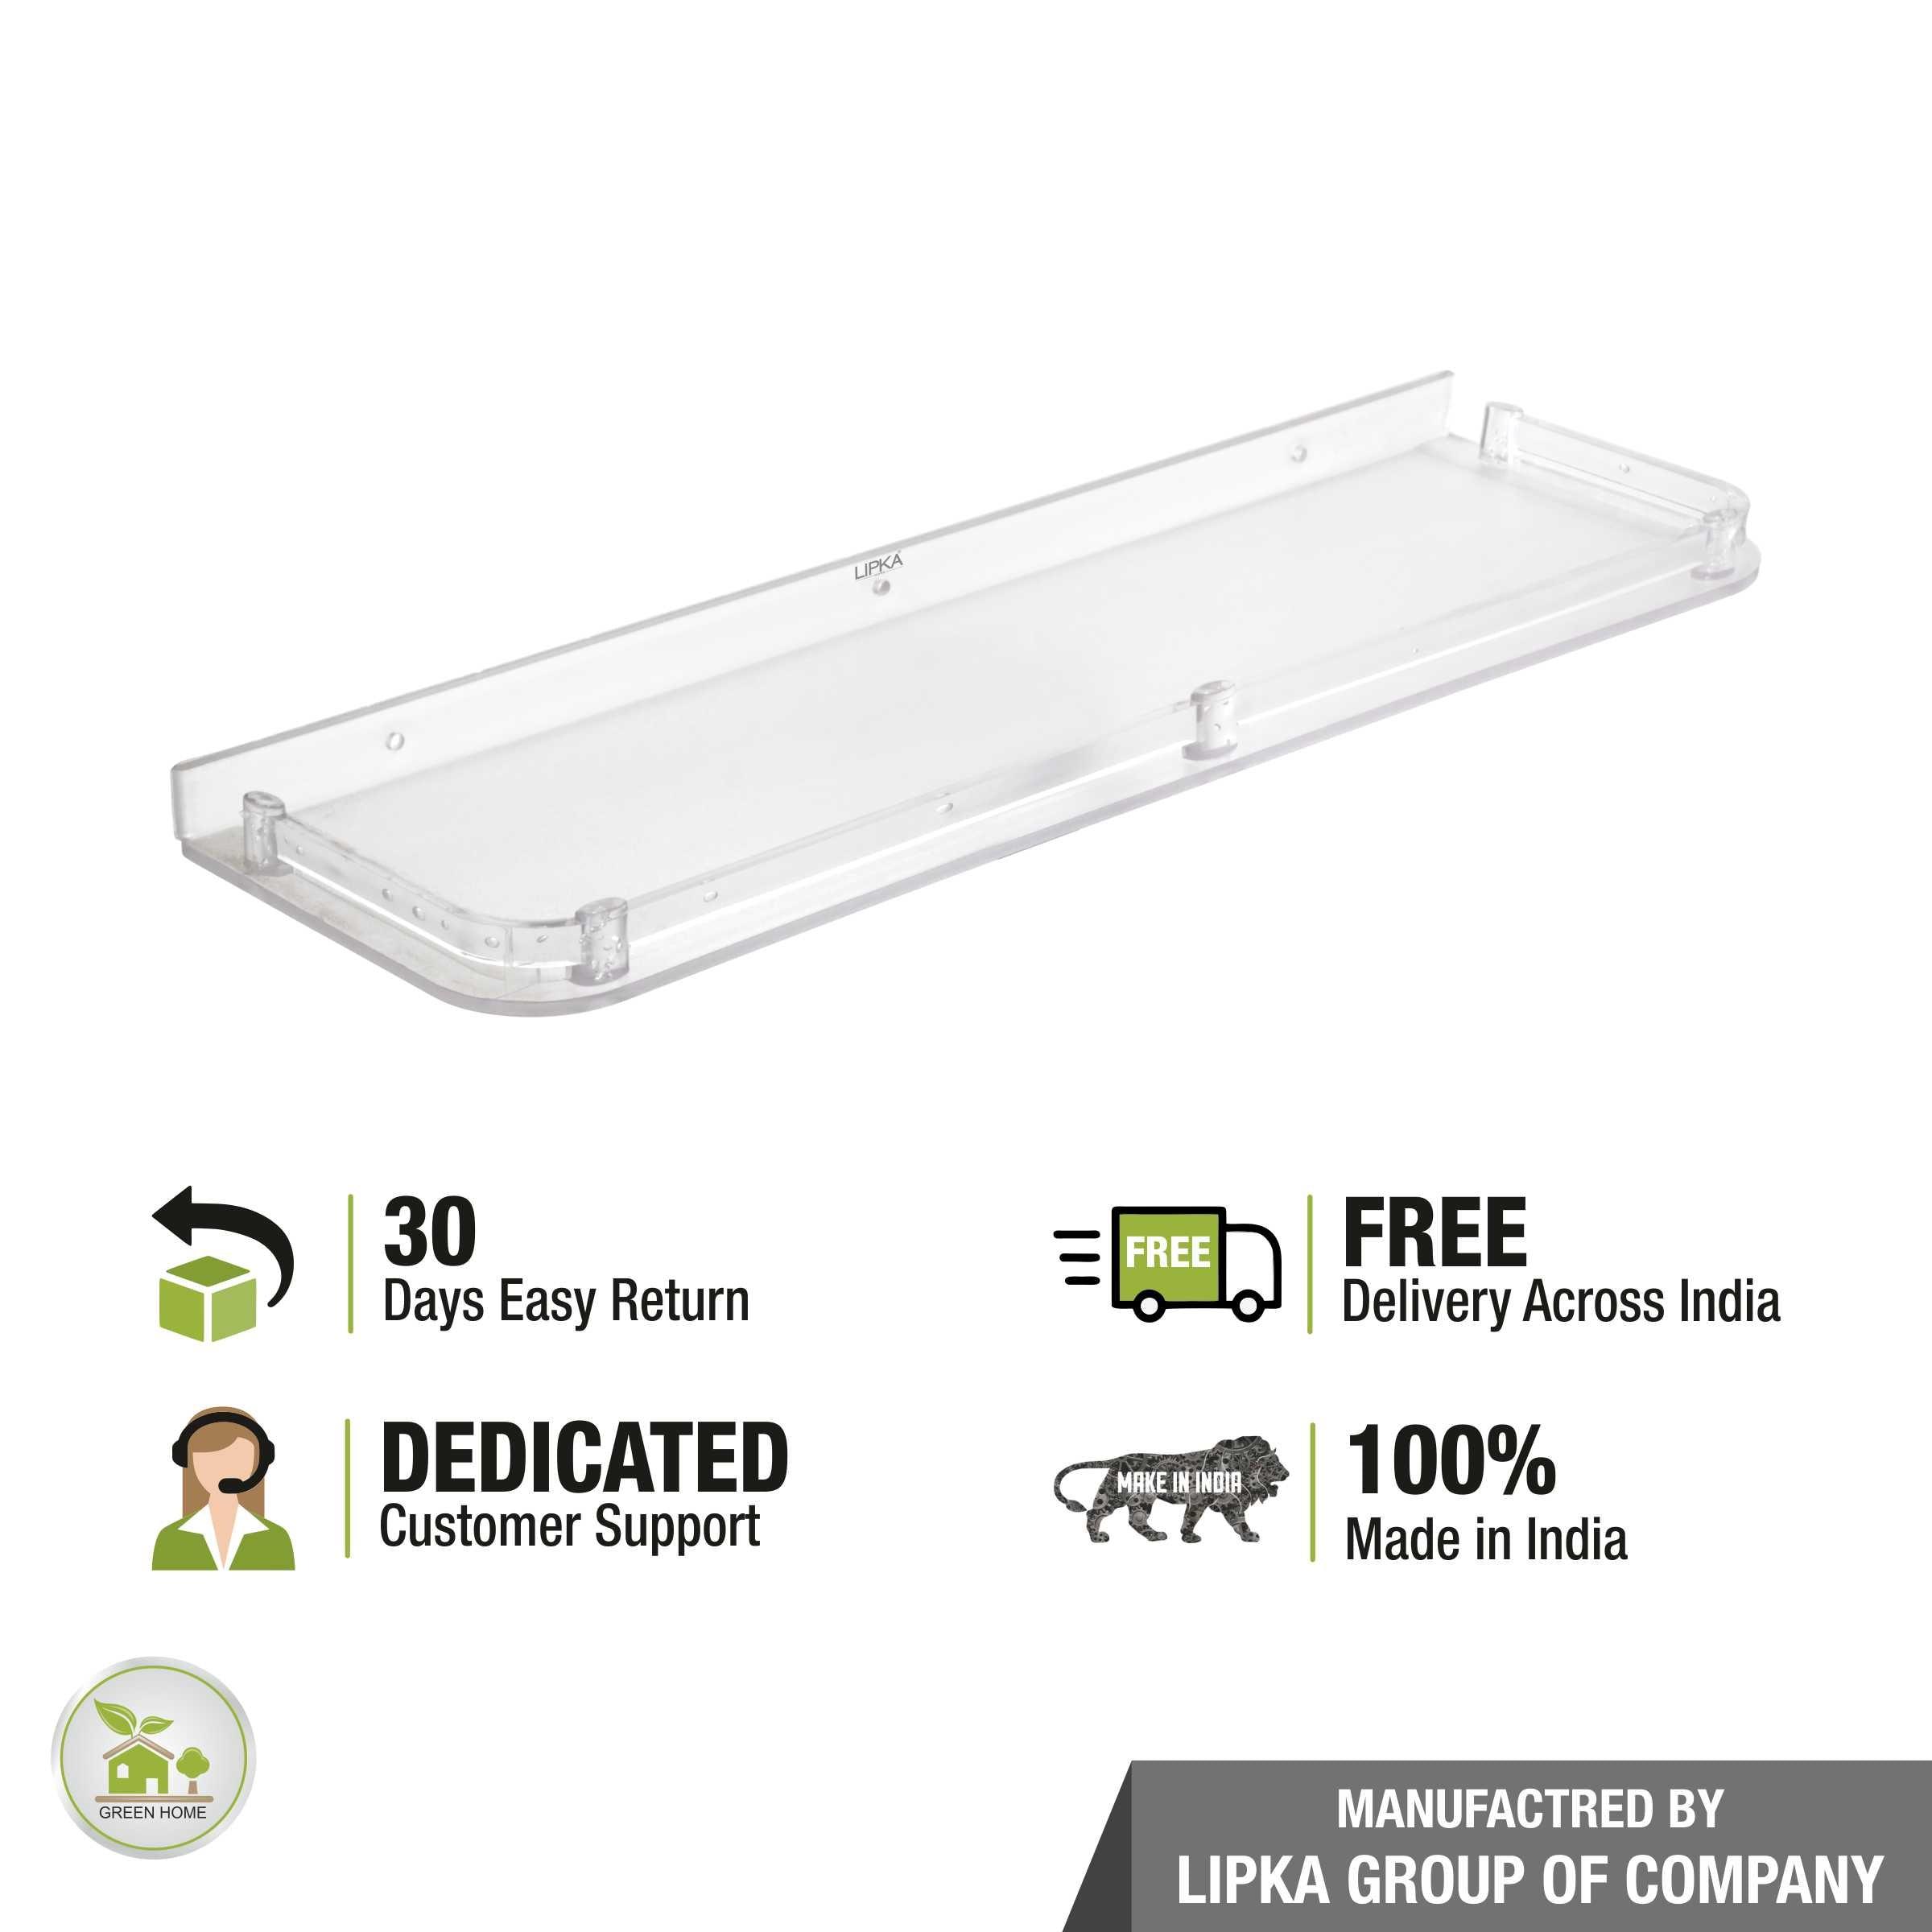 Square ABS Shelf Tray free delivery